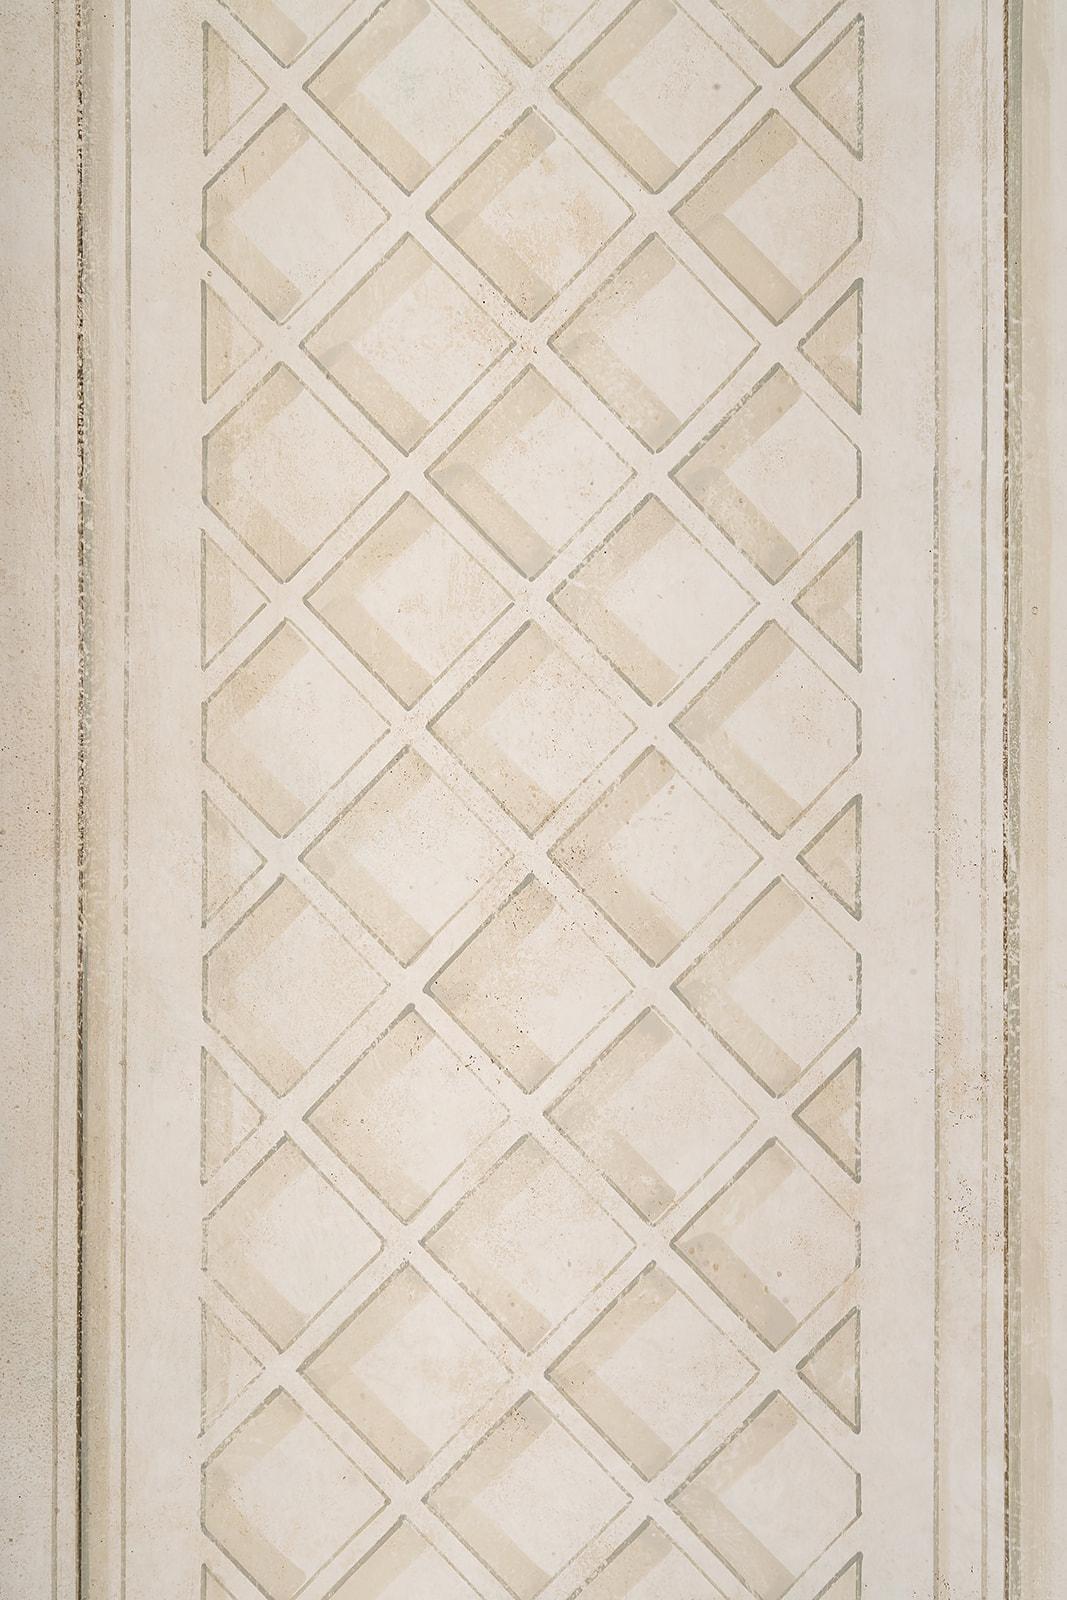 Other 18th Century Hand Painted Venetian Style White Decorative Panel with trellis  For Sale